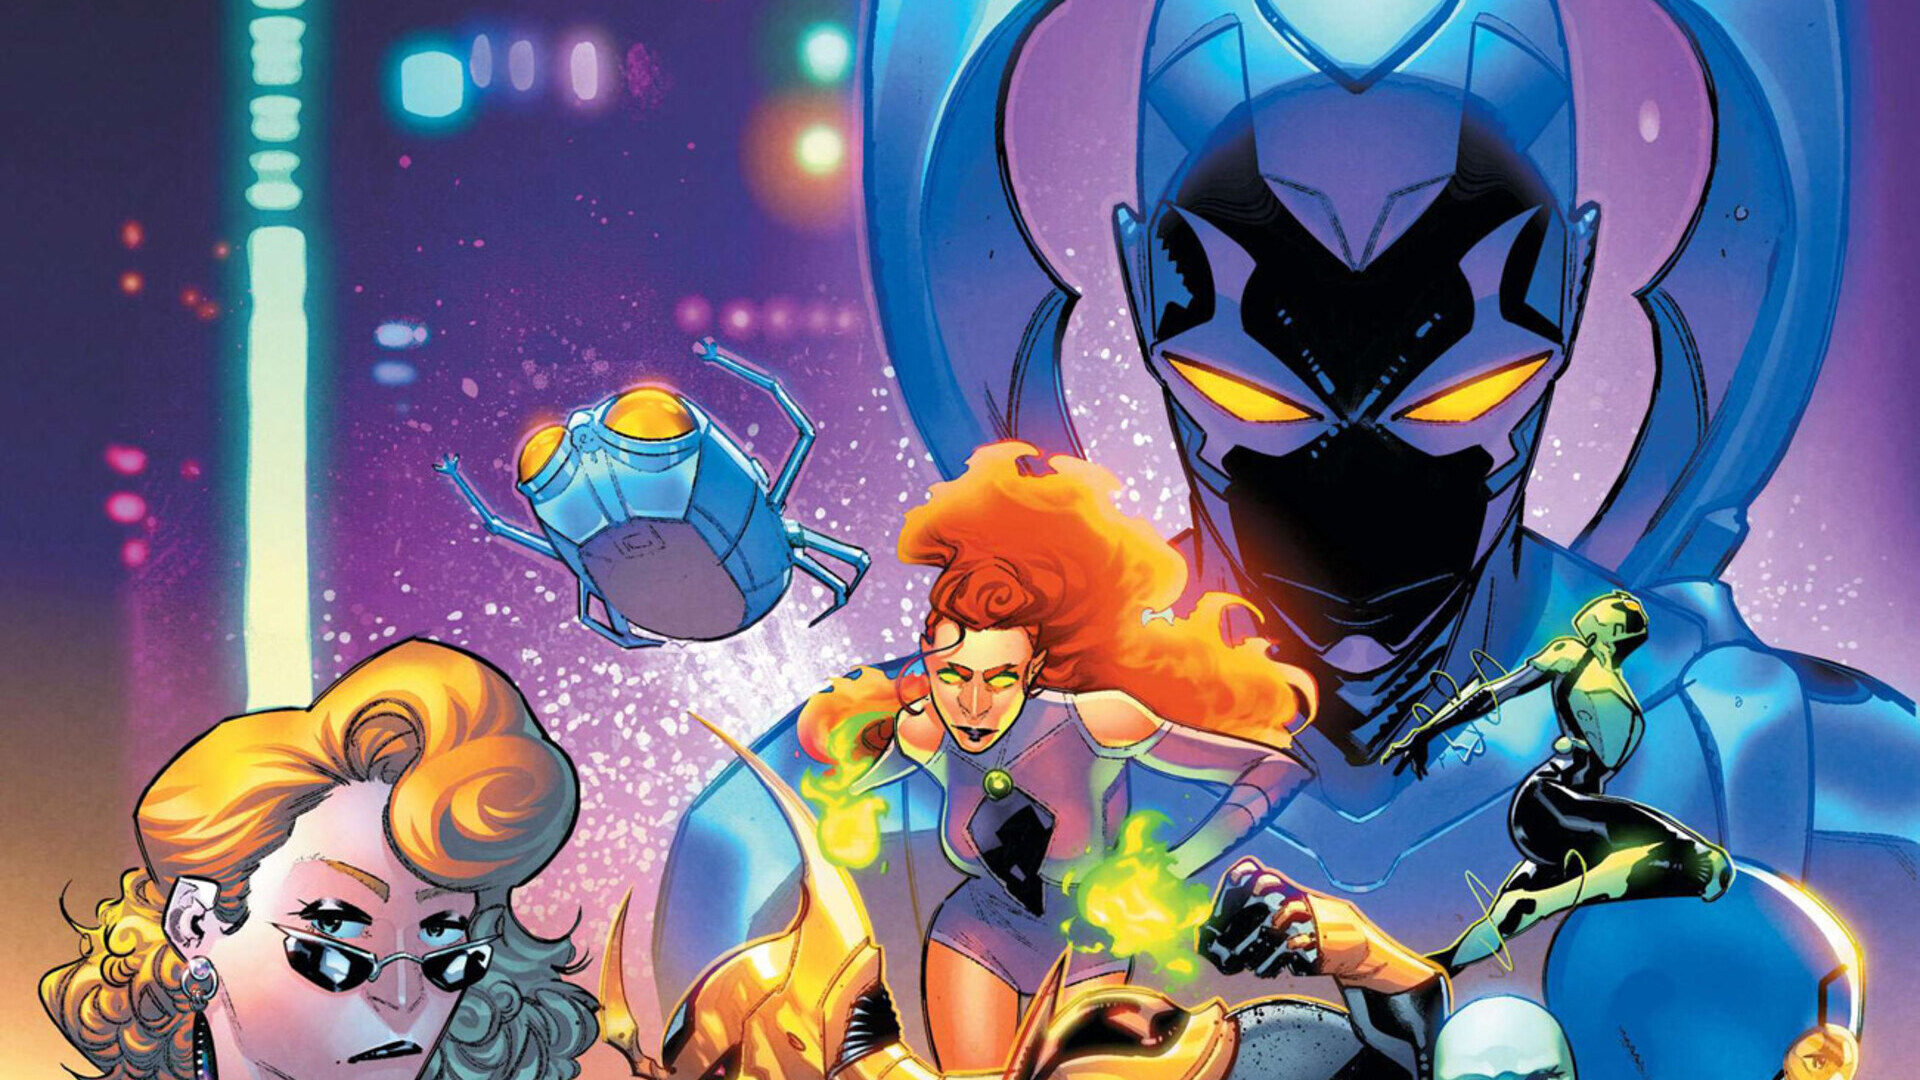 Blue Beetle #1 provides the perfect template for a sequel movie